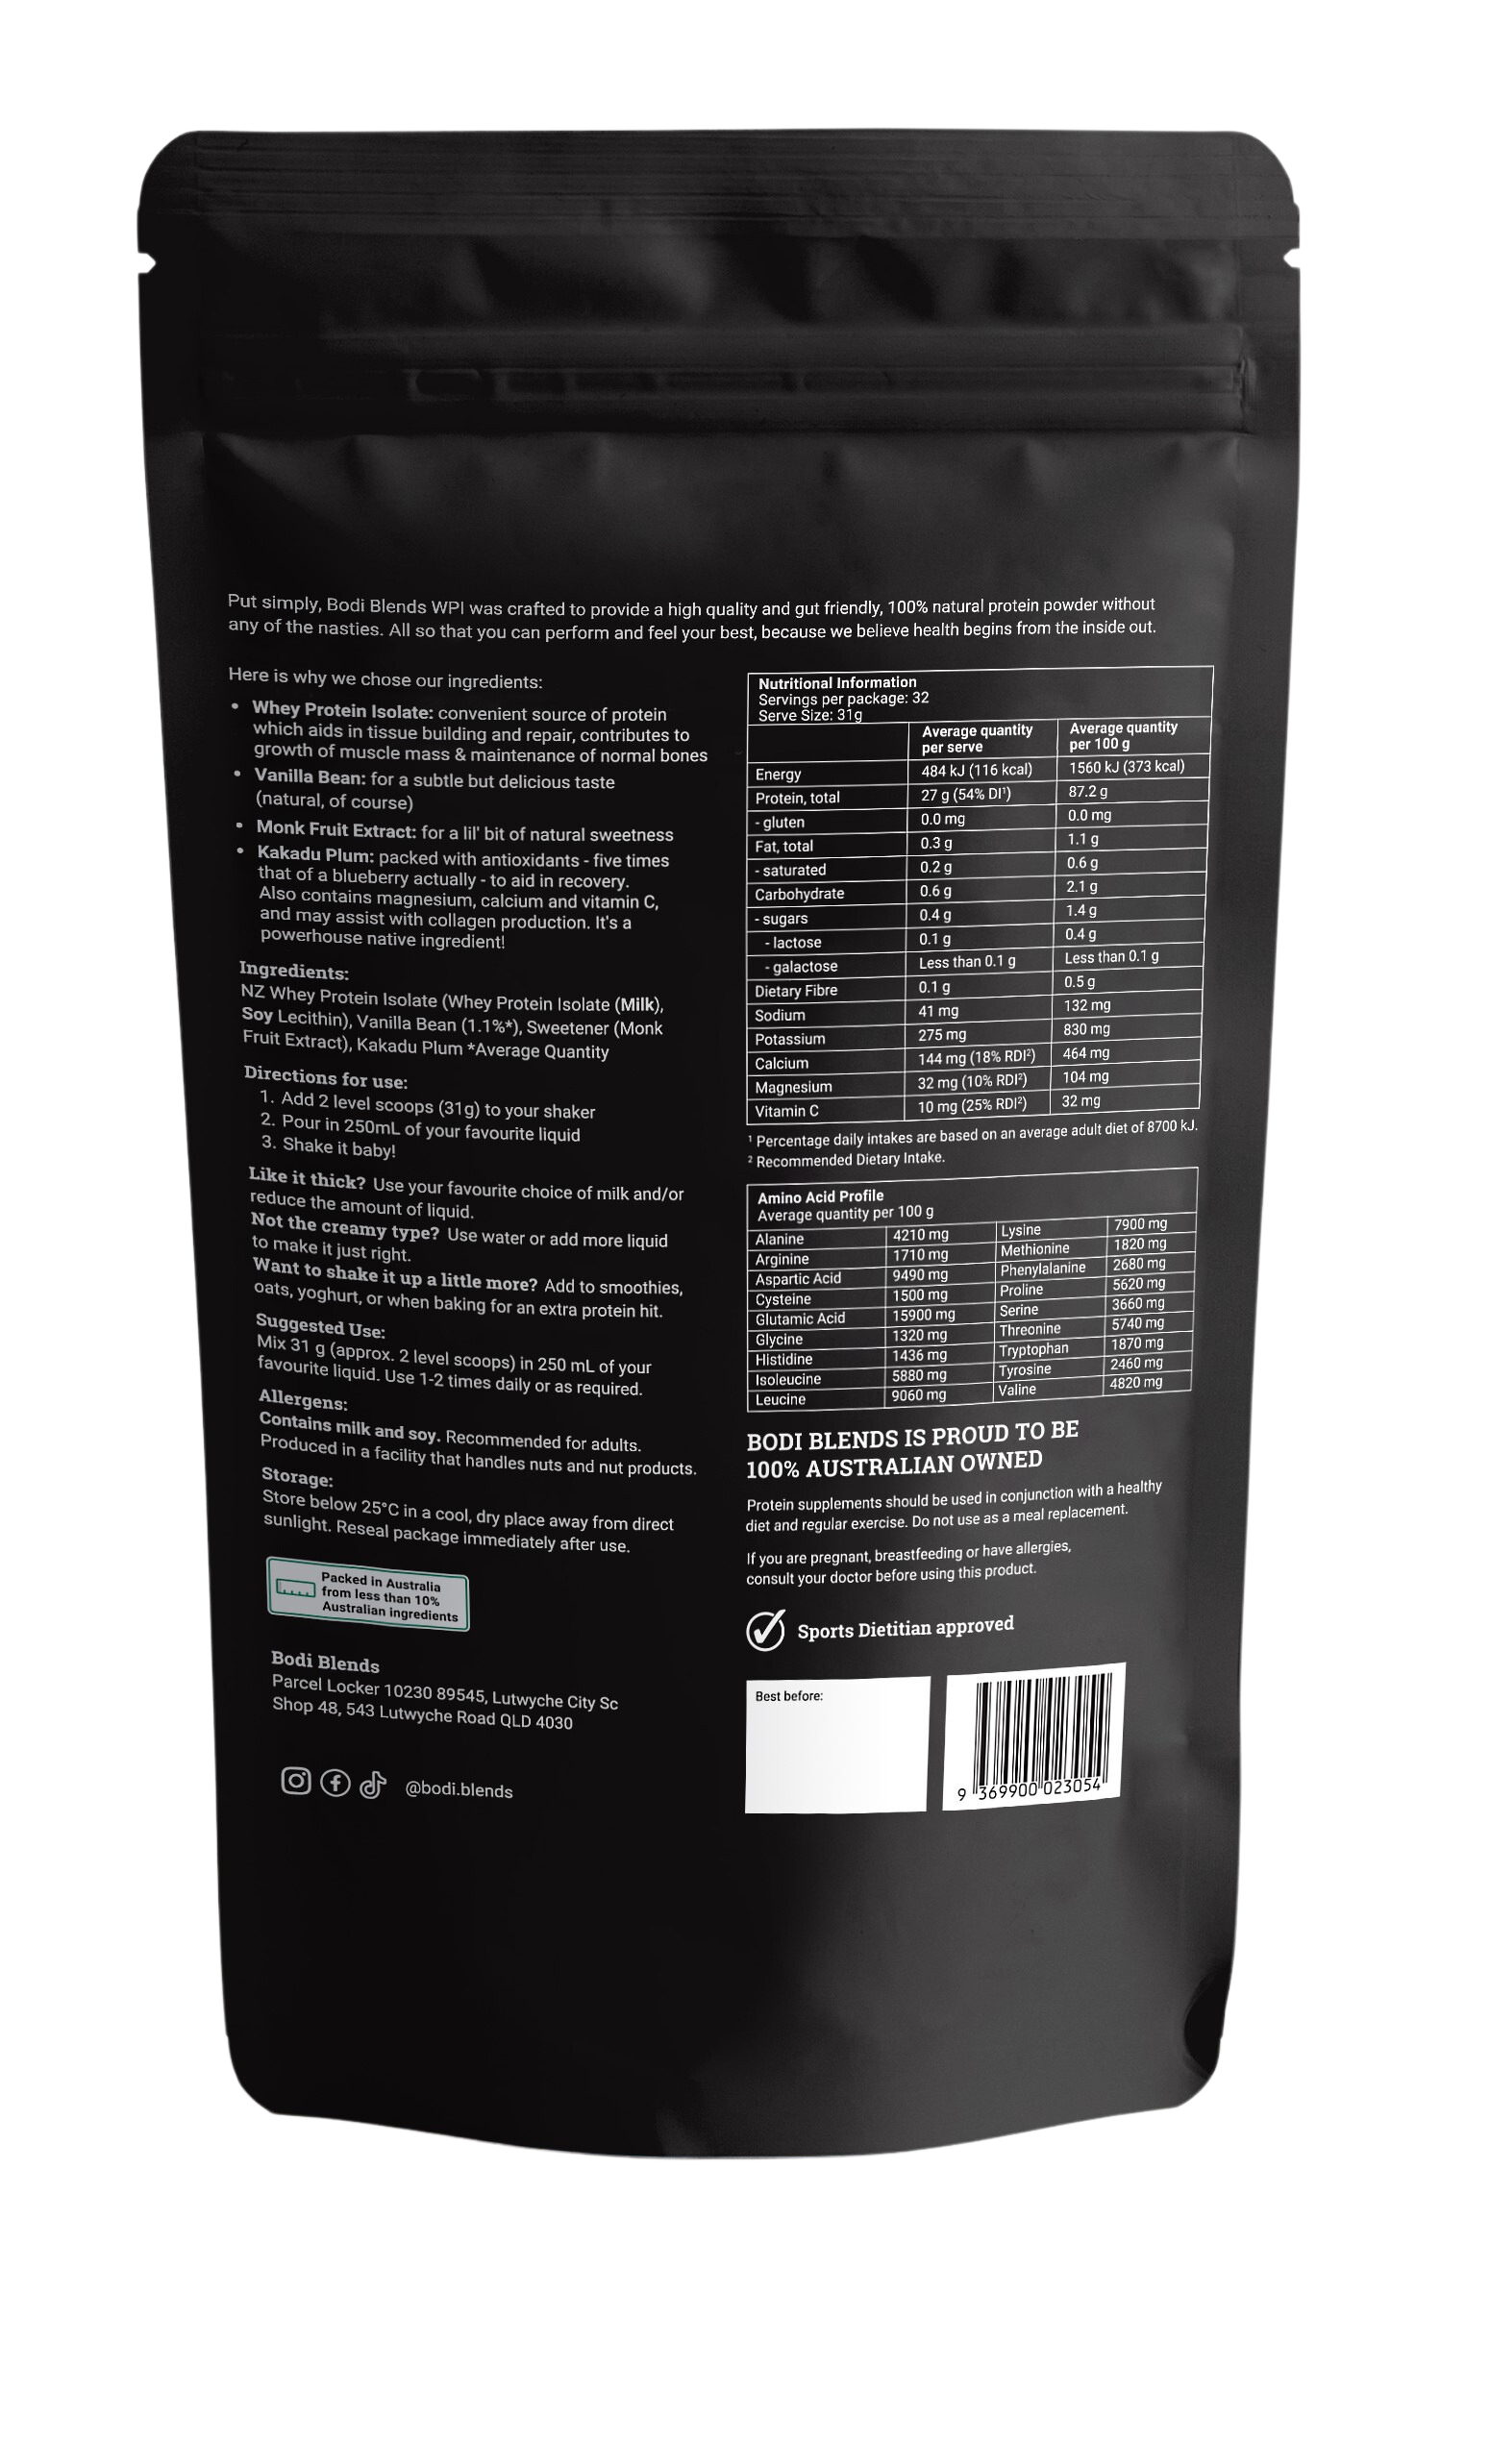 Back of a stand up pouch of vanilla flavoured whey protein isolate powder. The label shows information about the brand, ingredients, ways to use the powder, a nutritional panel and other information like storage, allergies and suggested use. The powder is in a resealable, black plastic stand up pouch.